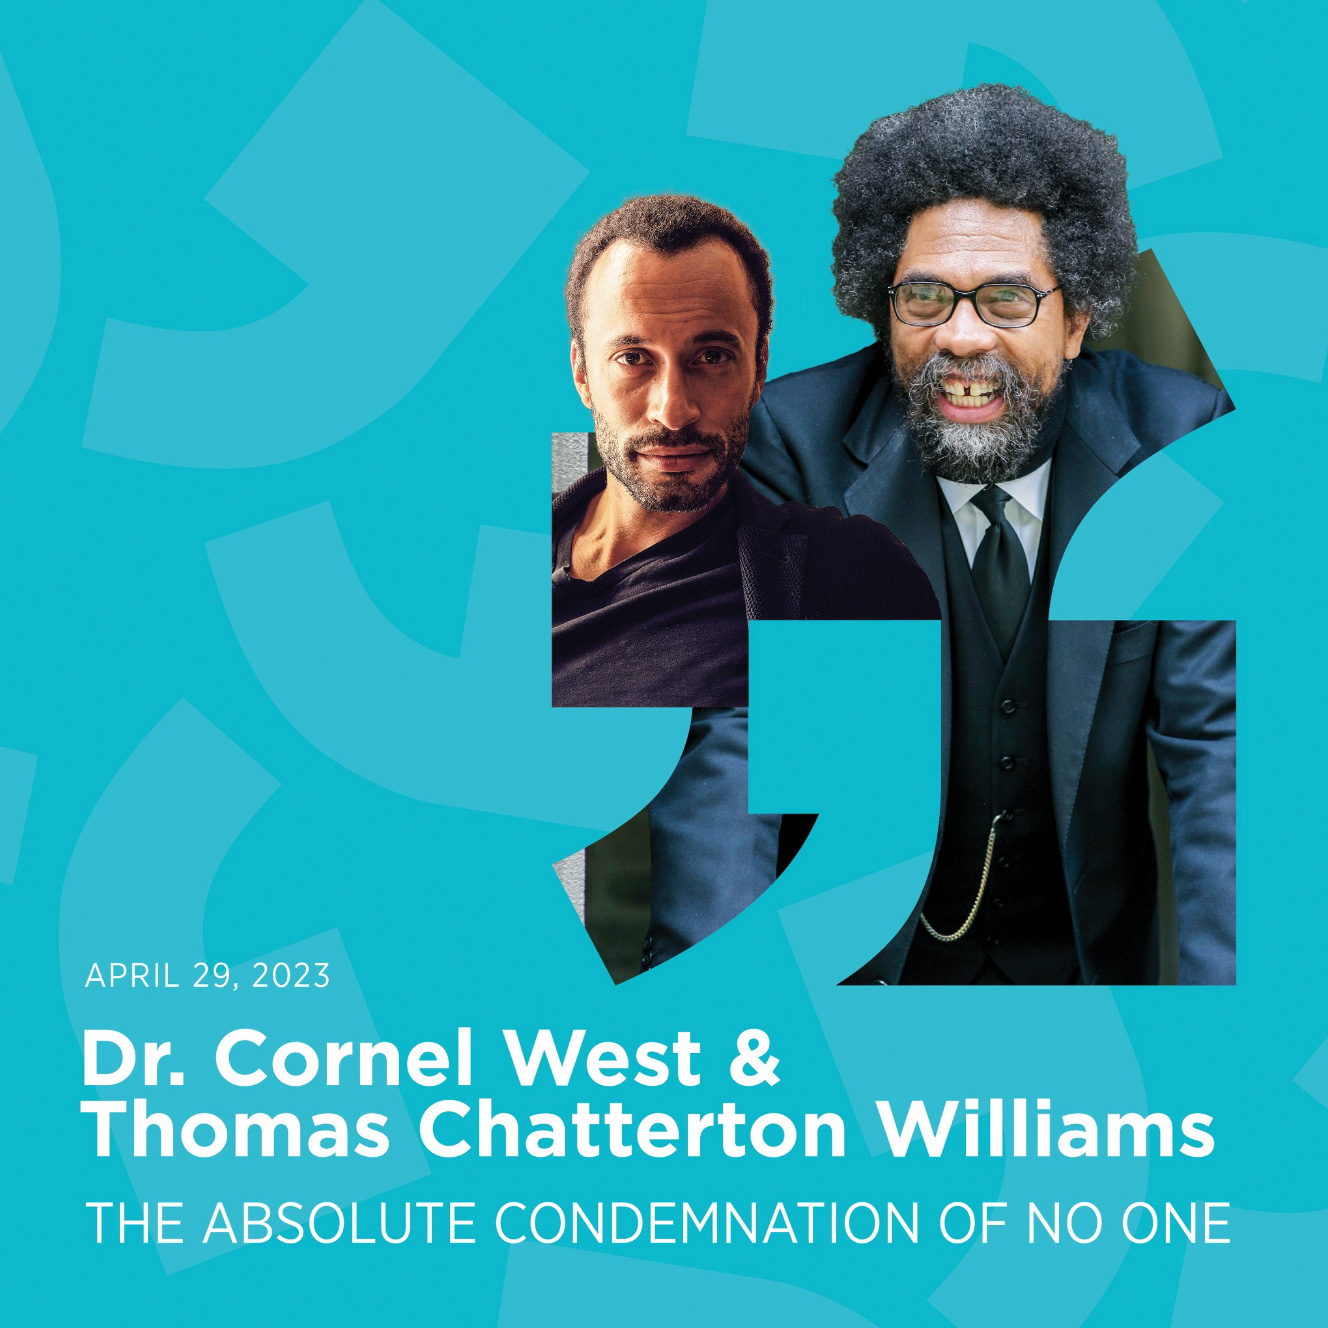 Event promo for Dr. Cornel West and Thomas Chatterton Williams